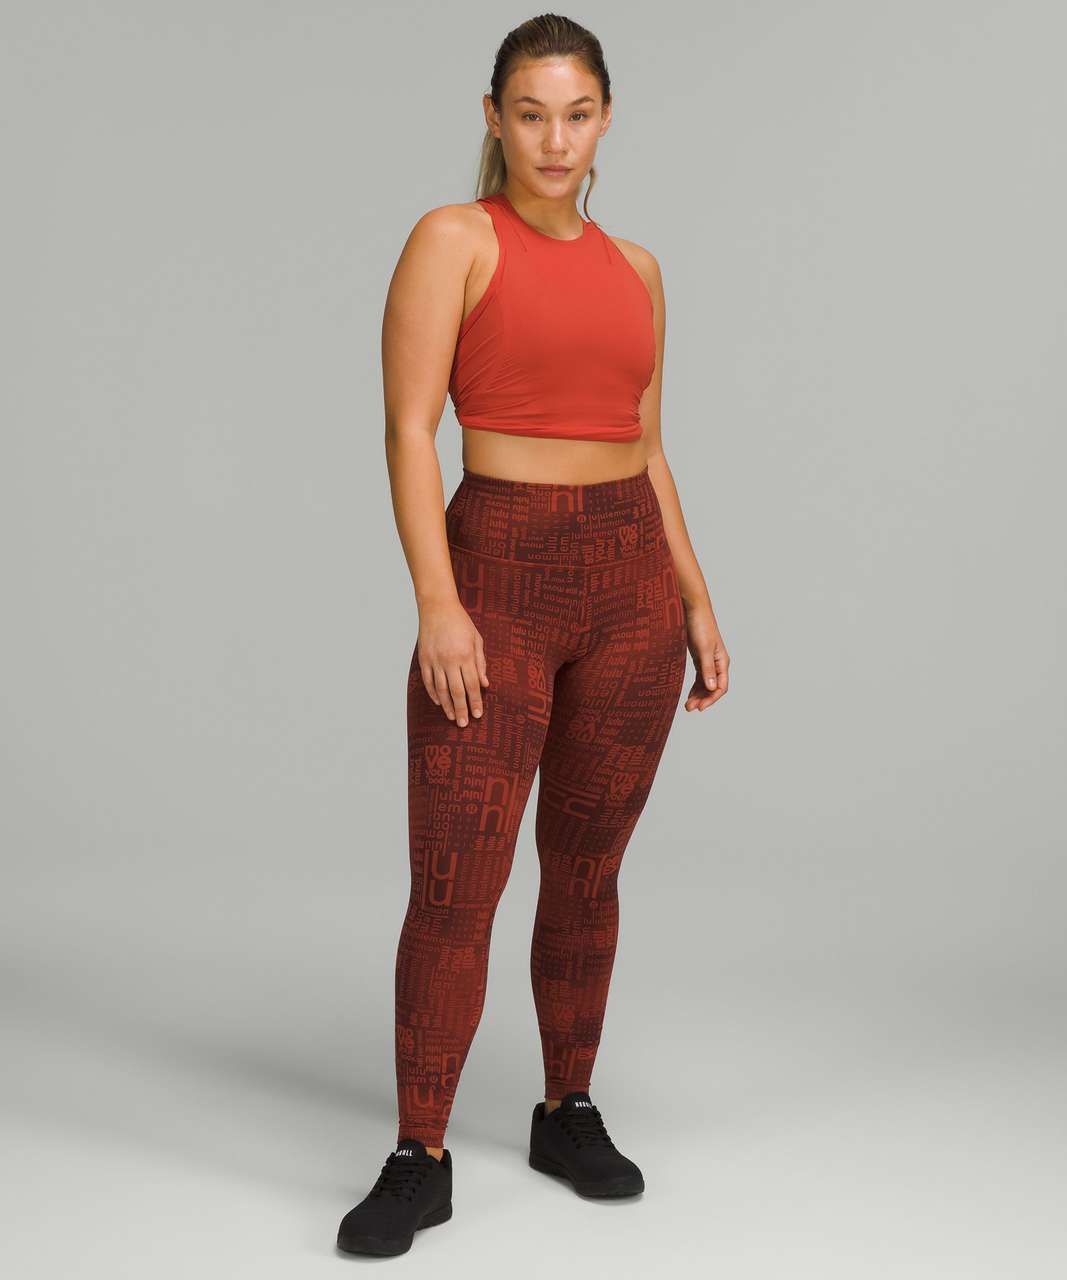 NWT Lululemon Wunder Under High-Rise 28 Tight Sz 2 Red Ombre Speckle